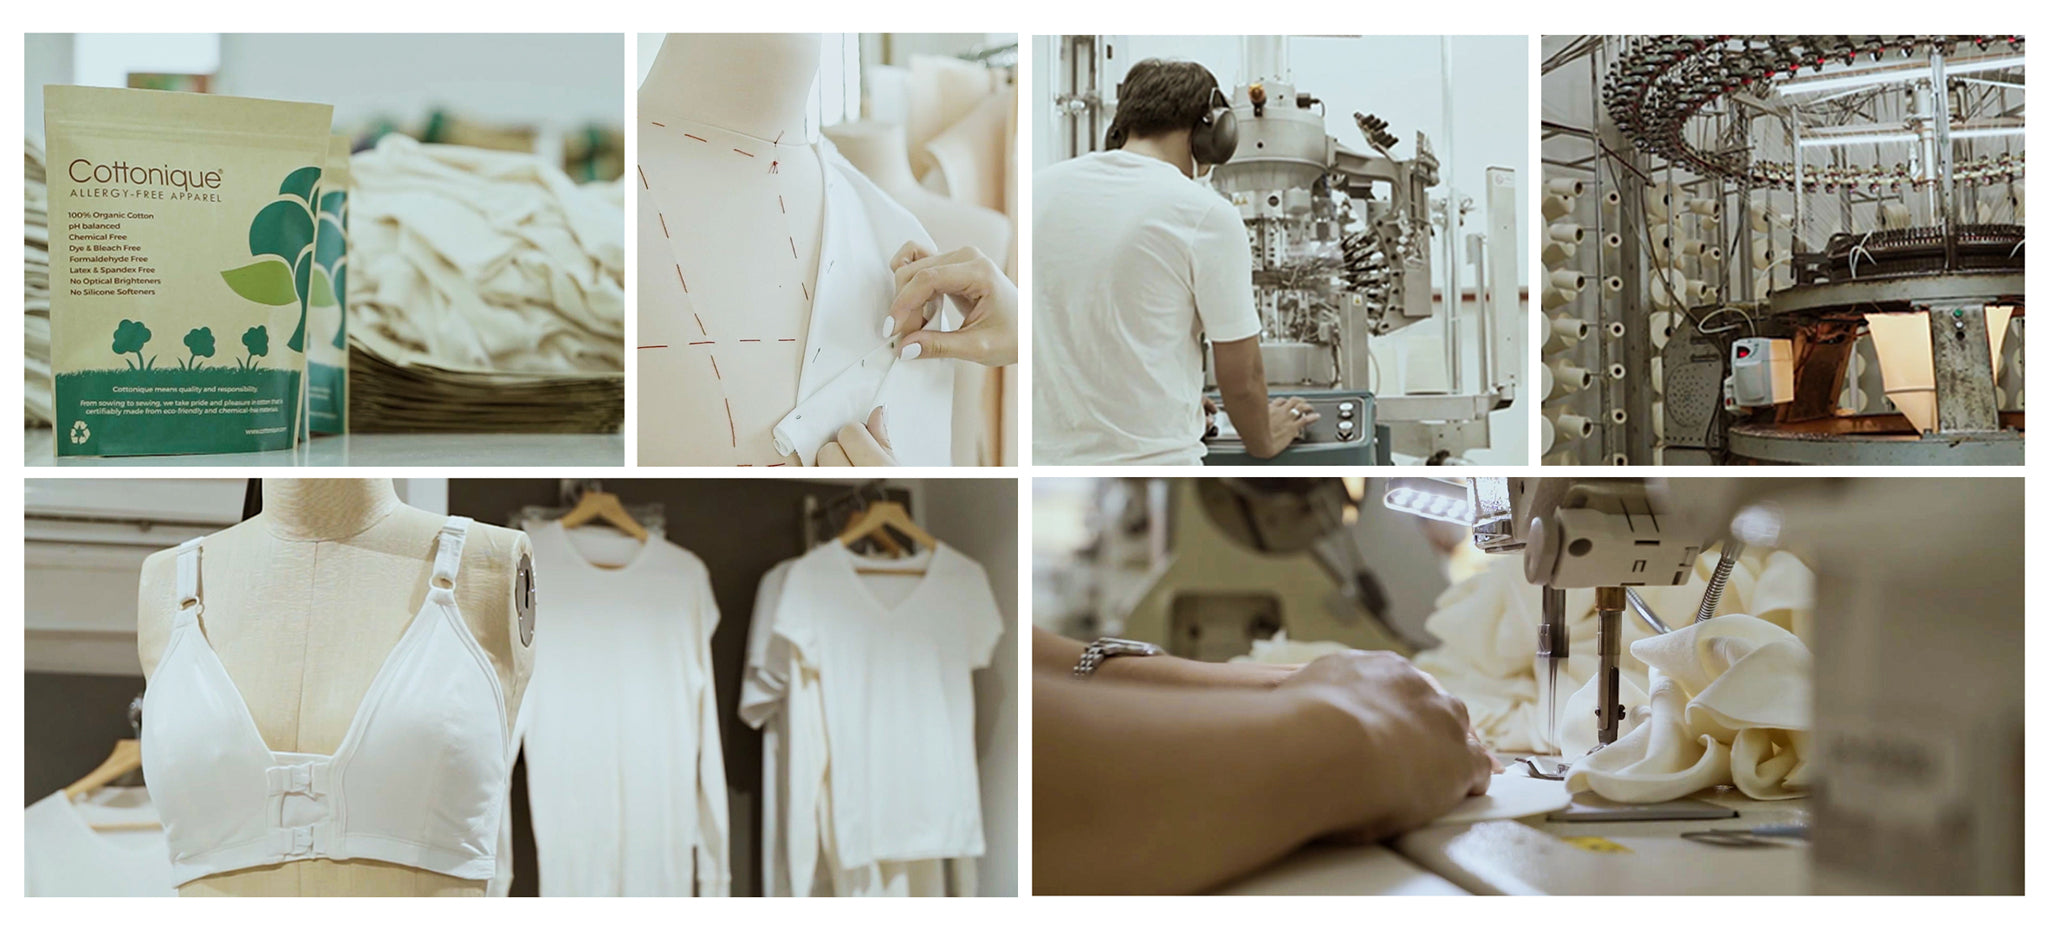 At Cottonique we work both with manual labor but also with machines. They work together with a team of tailors